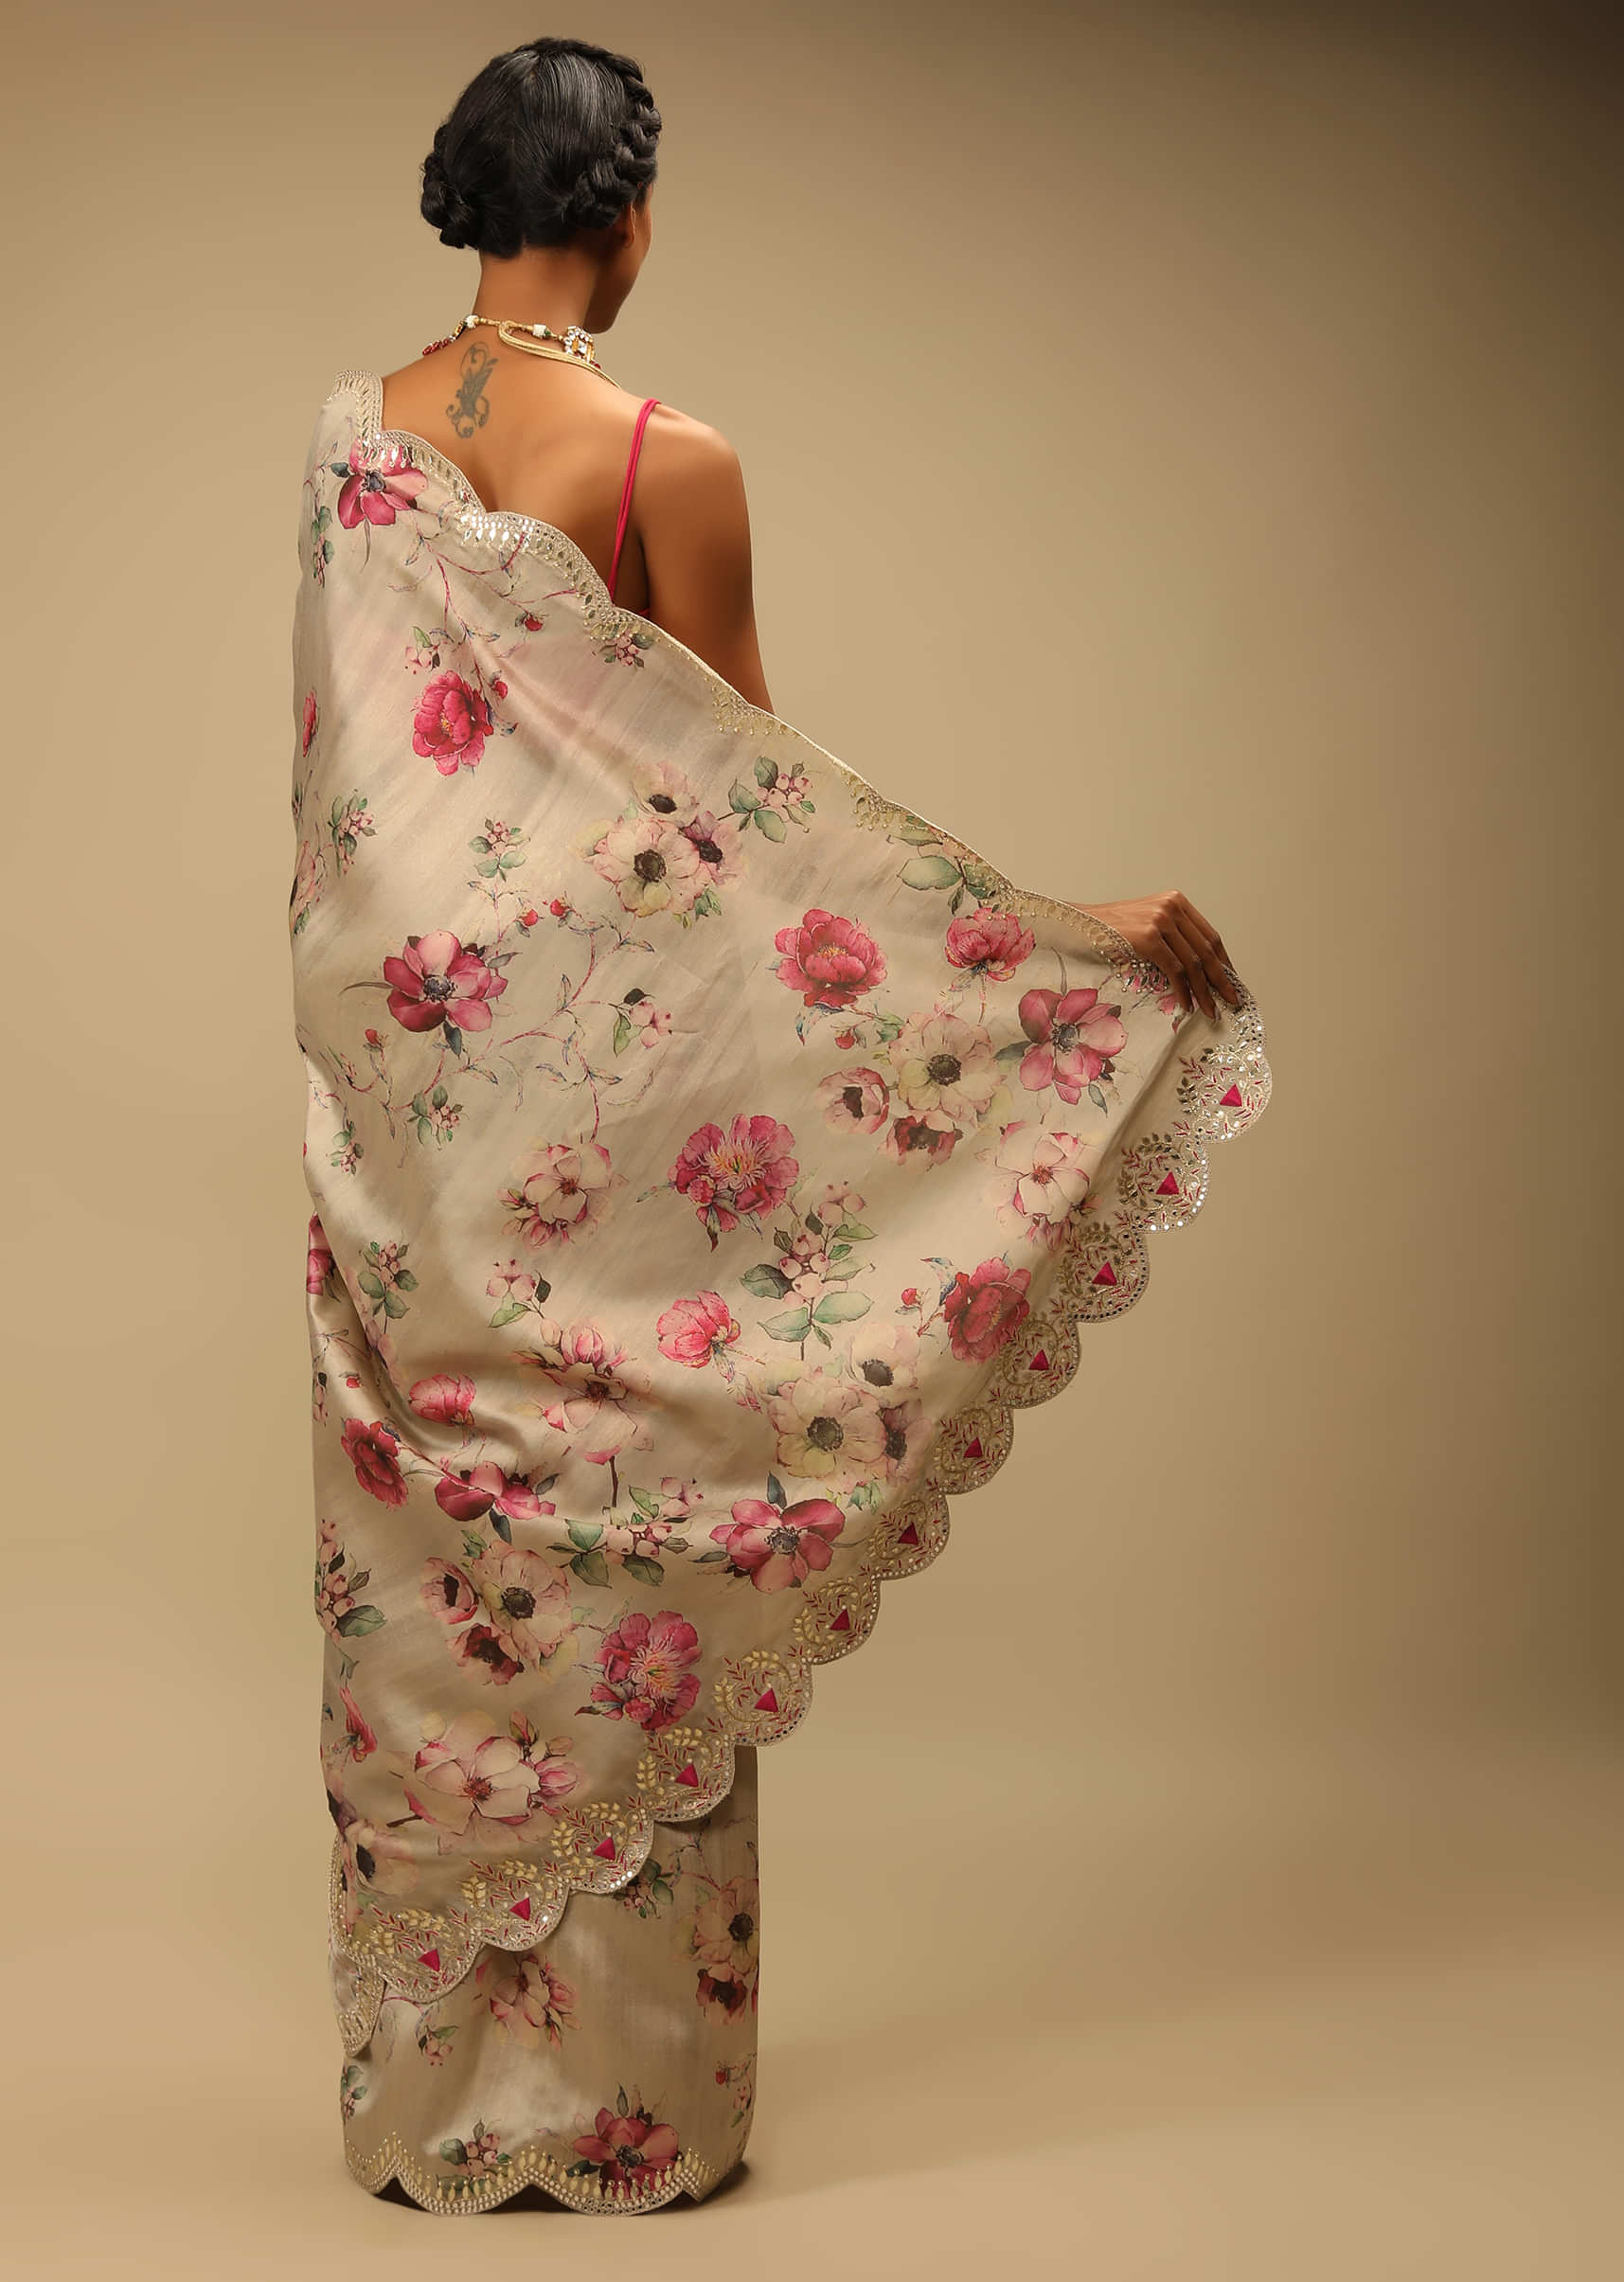 Sand Beige Saree In Tussar Silk With Multi Colored Floral Print And Gotta Border 